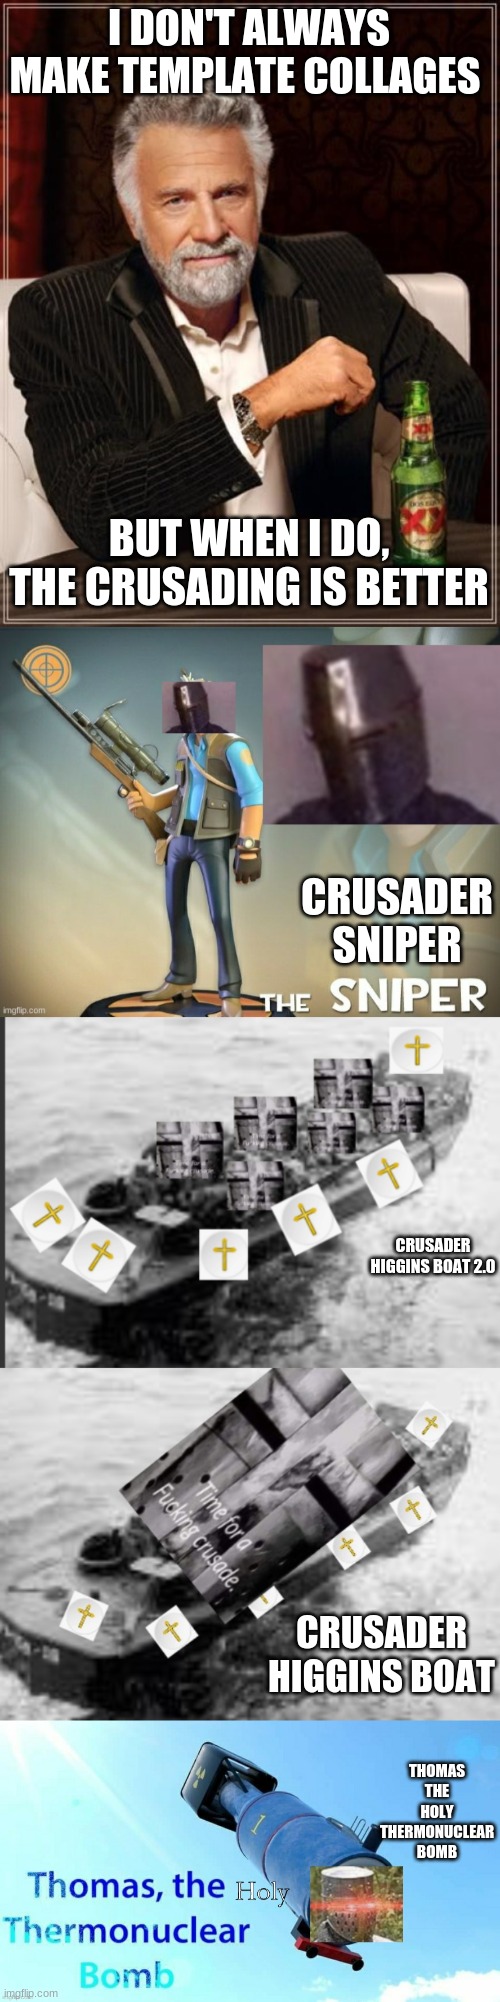 I DON'T ALWAYS MAKE TEMPLATE COLLAGES; BUT WHEN I DO, THE CRUSADING IS BETTER; CRUSADER SNIPER; CRUSADER HIGGINS BOAT 2.0; CRUSADER HIGGINS BOAT; THOMAS THE HOLY THERMONUCLEAR BOMB | image tagged in memes,the most interesting man in the world,crusader sniper,crusader higgins boat 2 0,crusader higgins boat | made w/ Imgflip meme maker